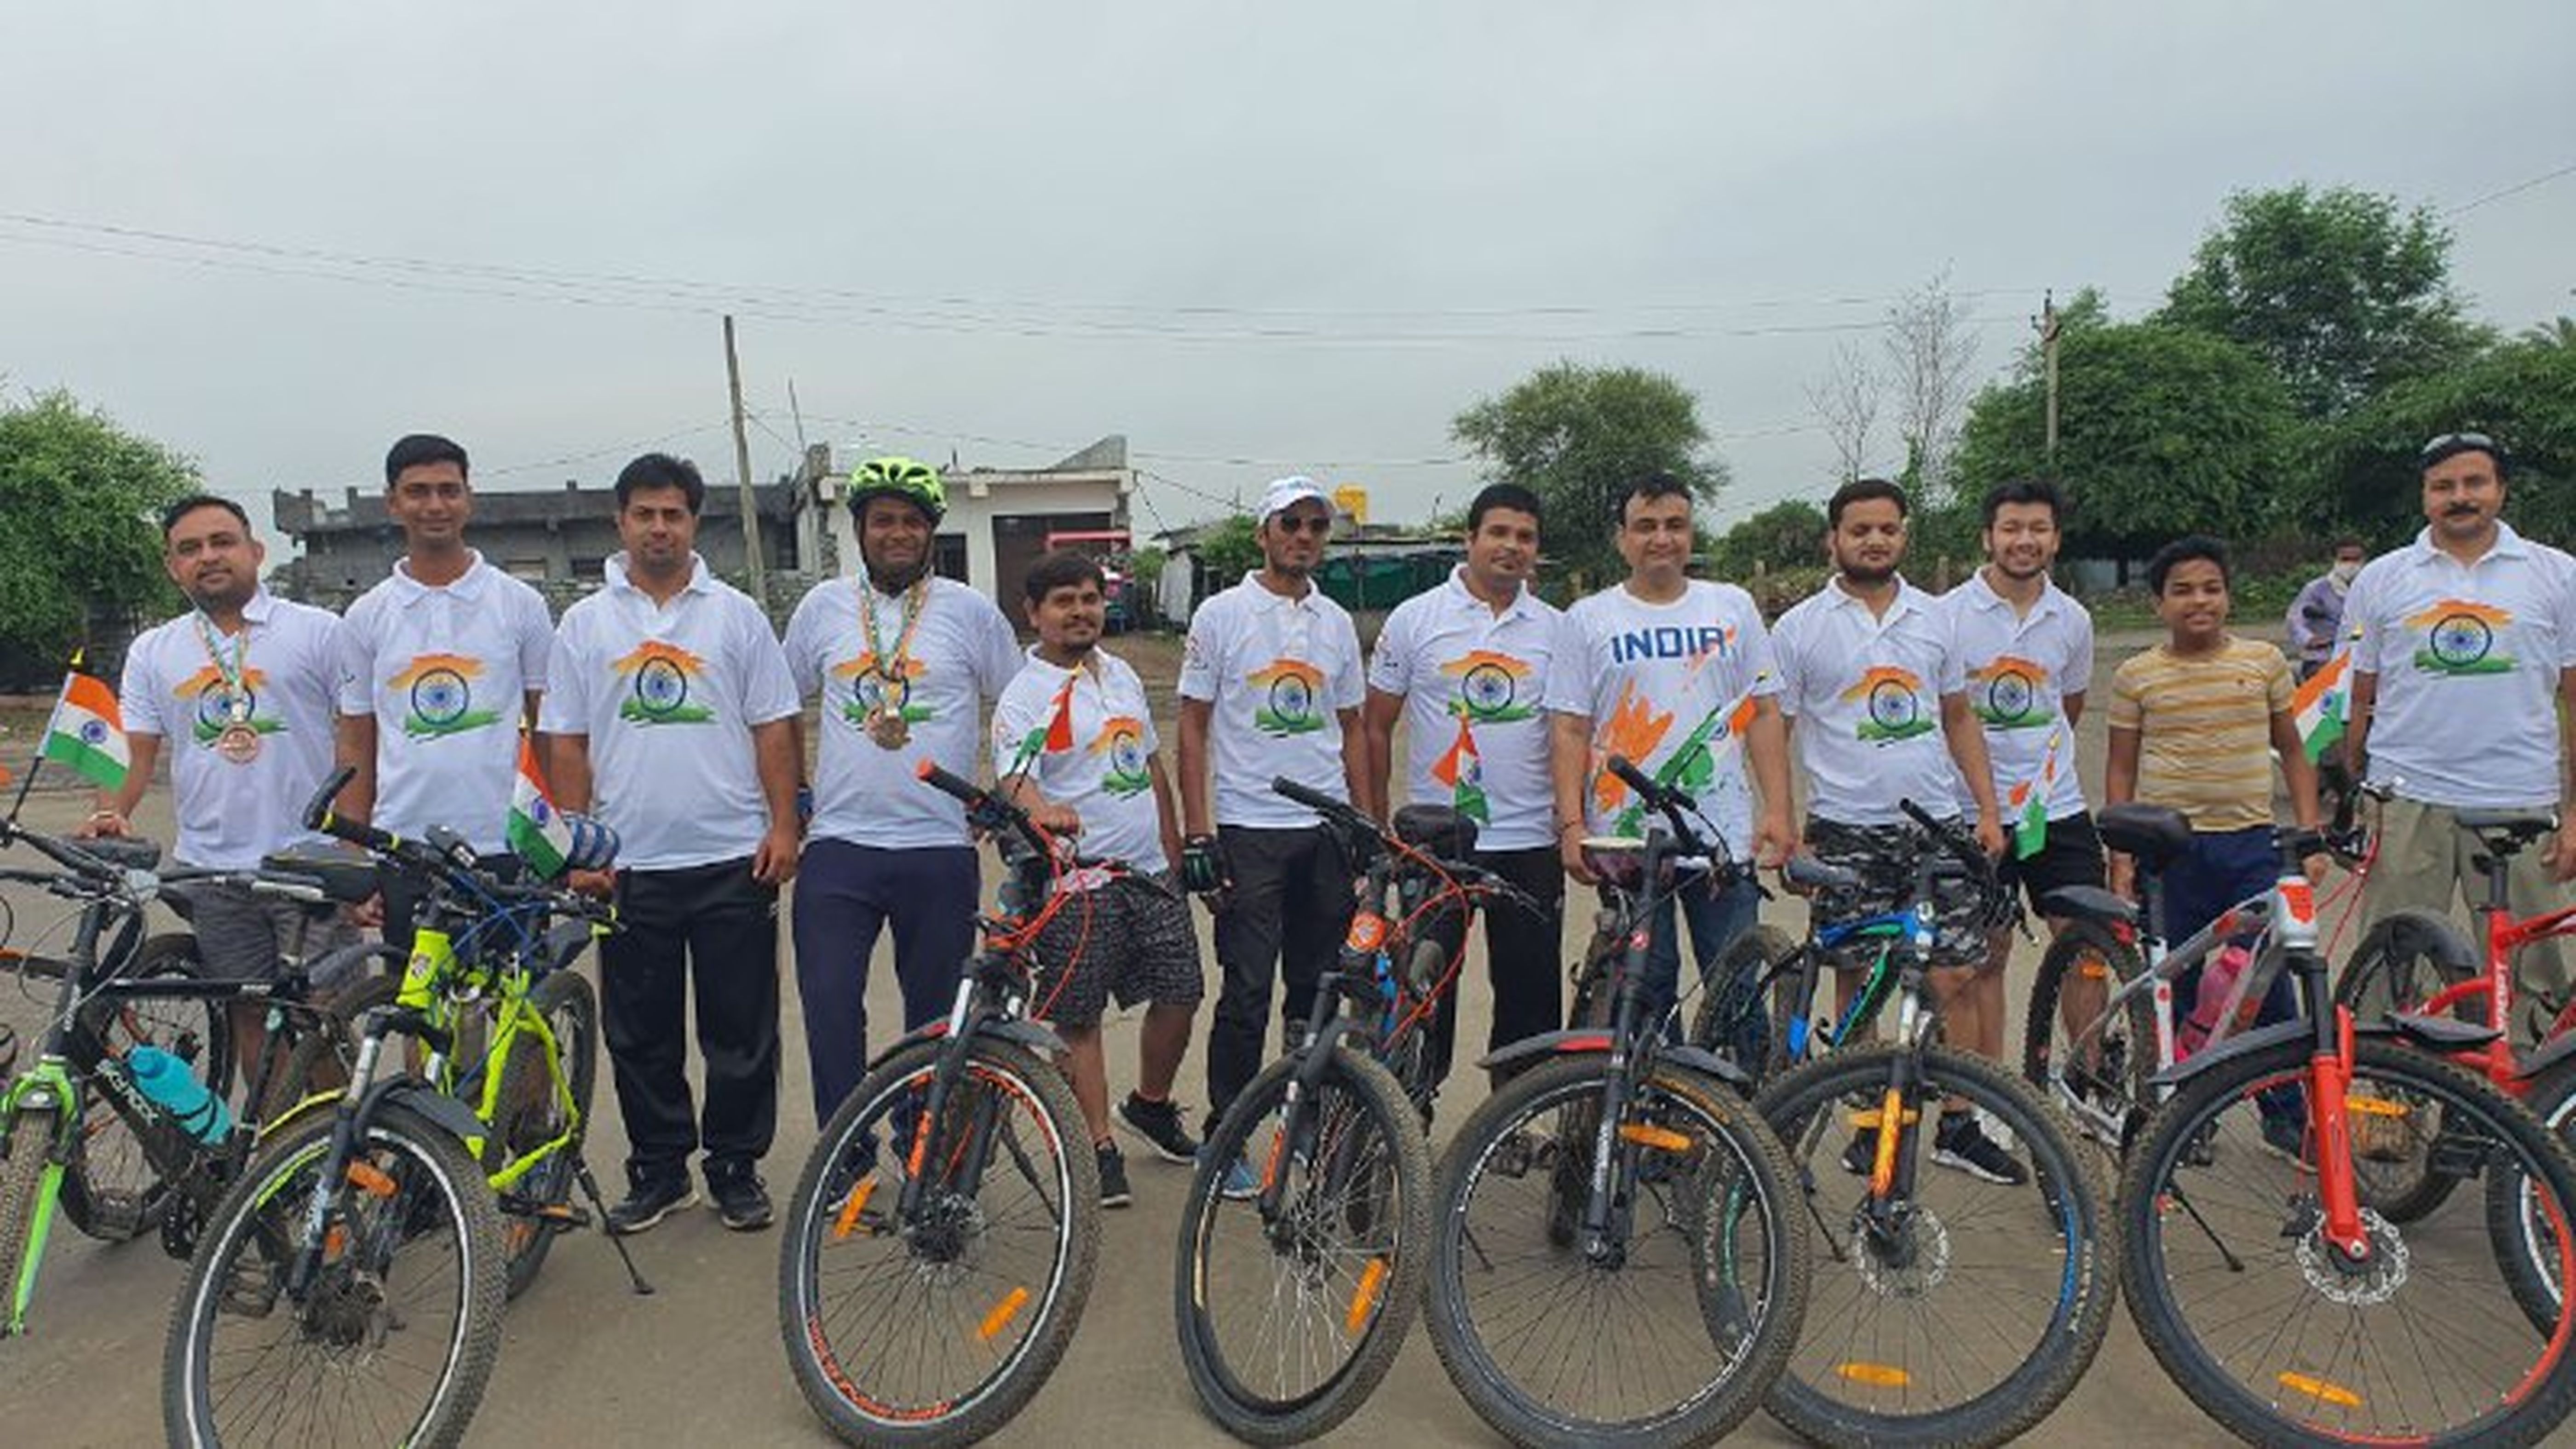 Youth are giving health mantra by cycling, winning medals